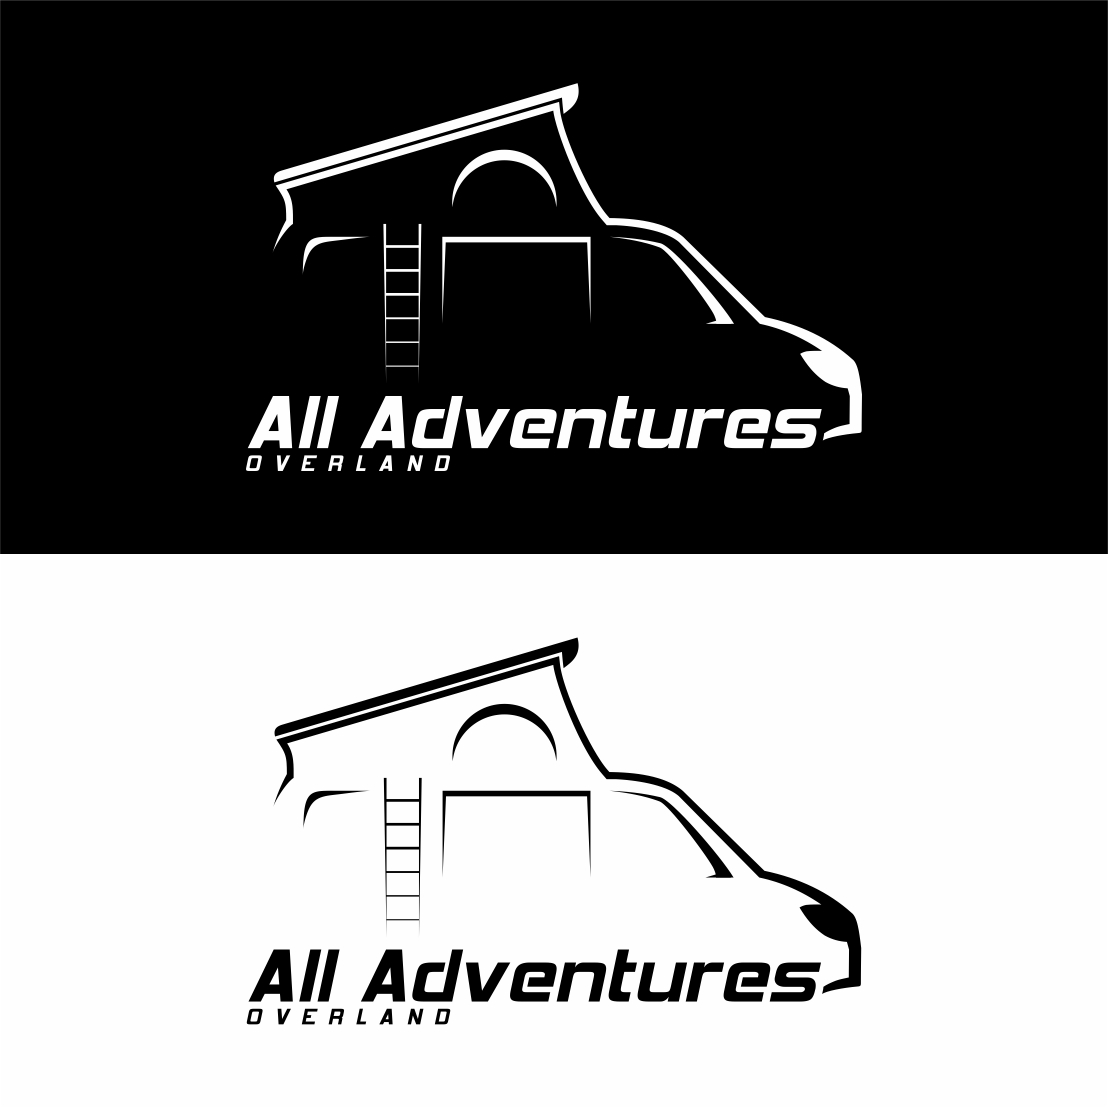 Camper van or recreational vehicle (RV) adventure car logo template, travel and recreation vector design - only 7$ cover image.